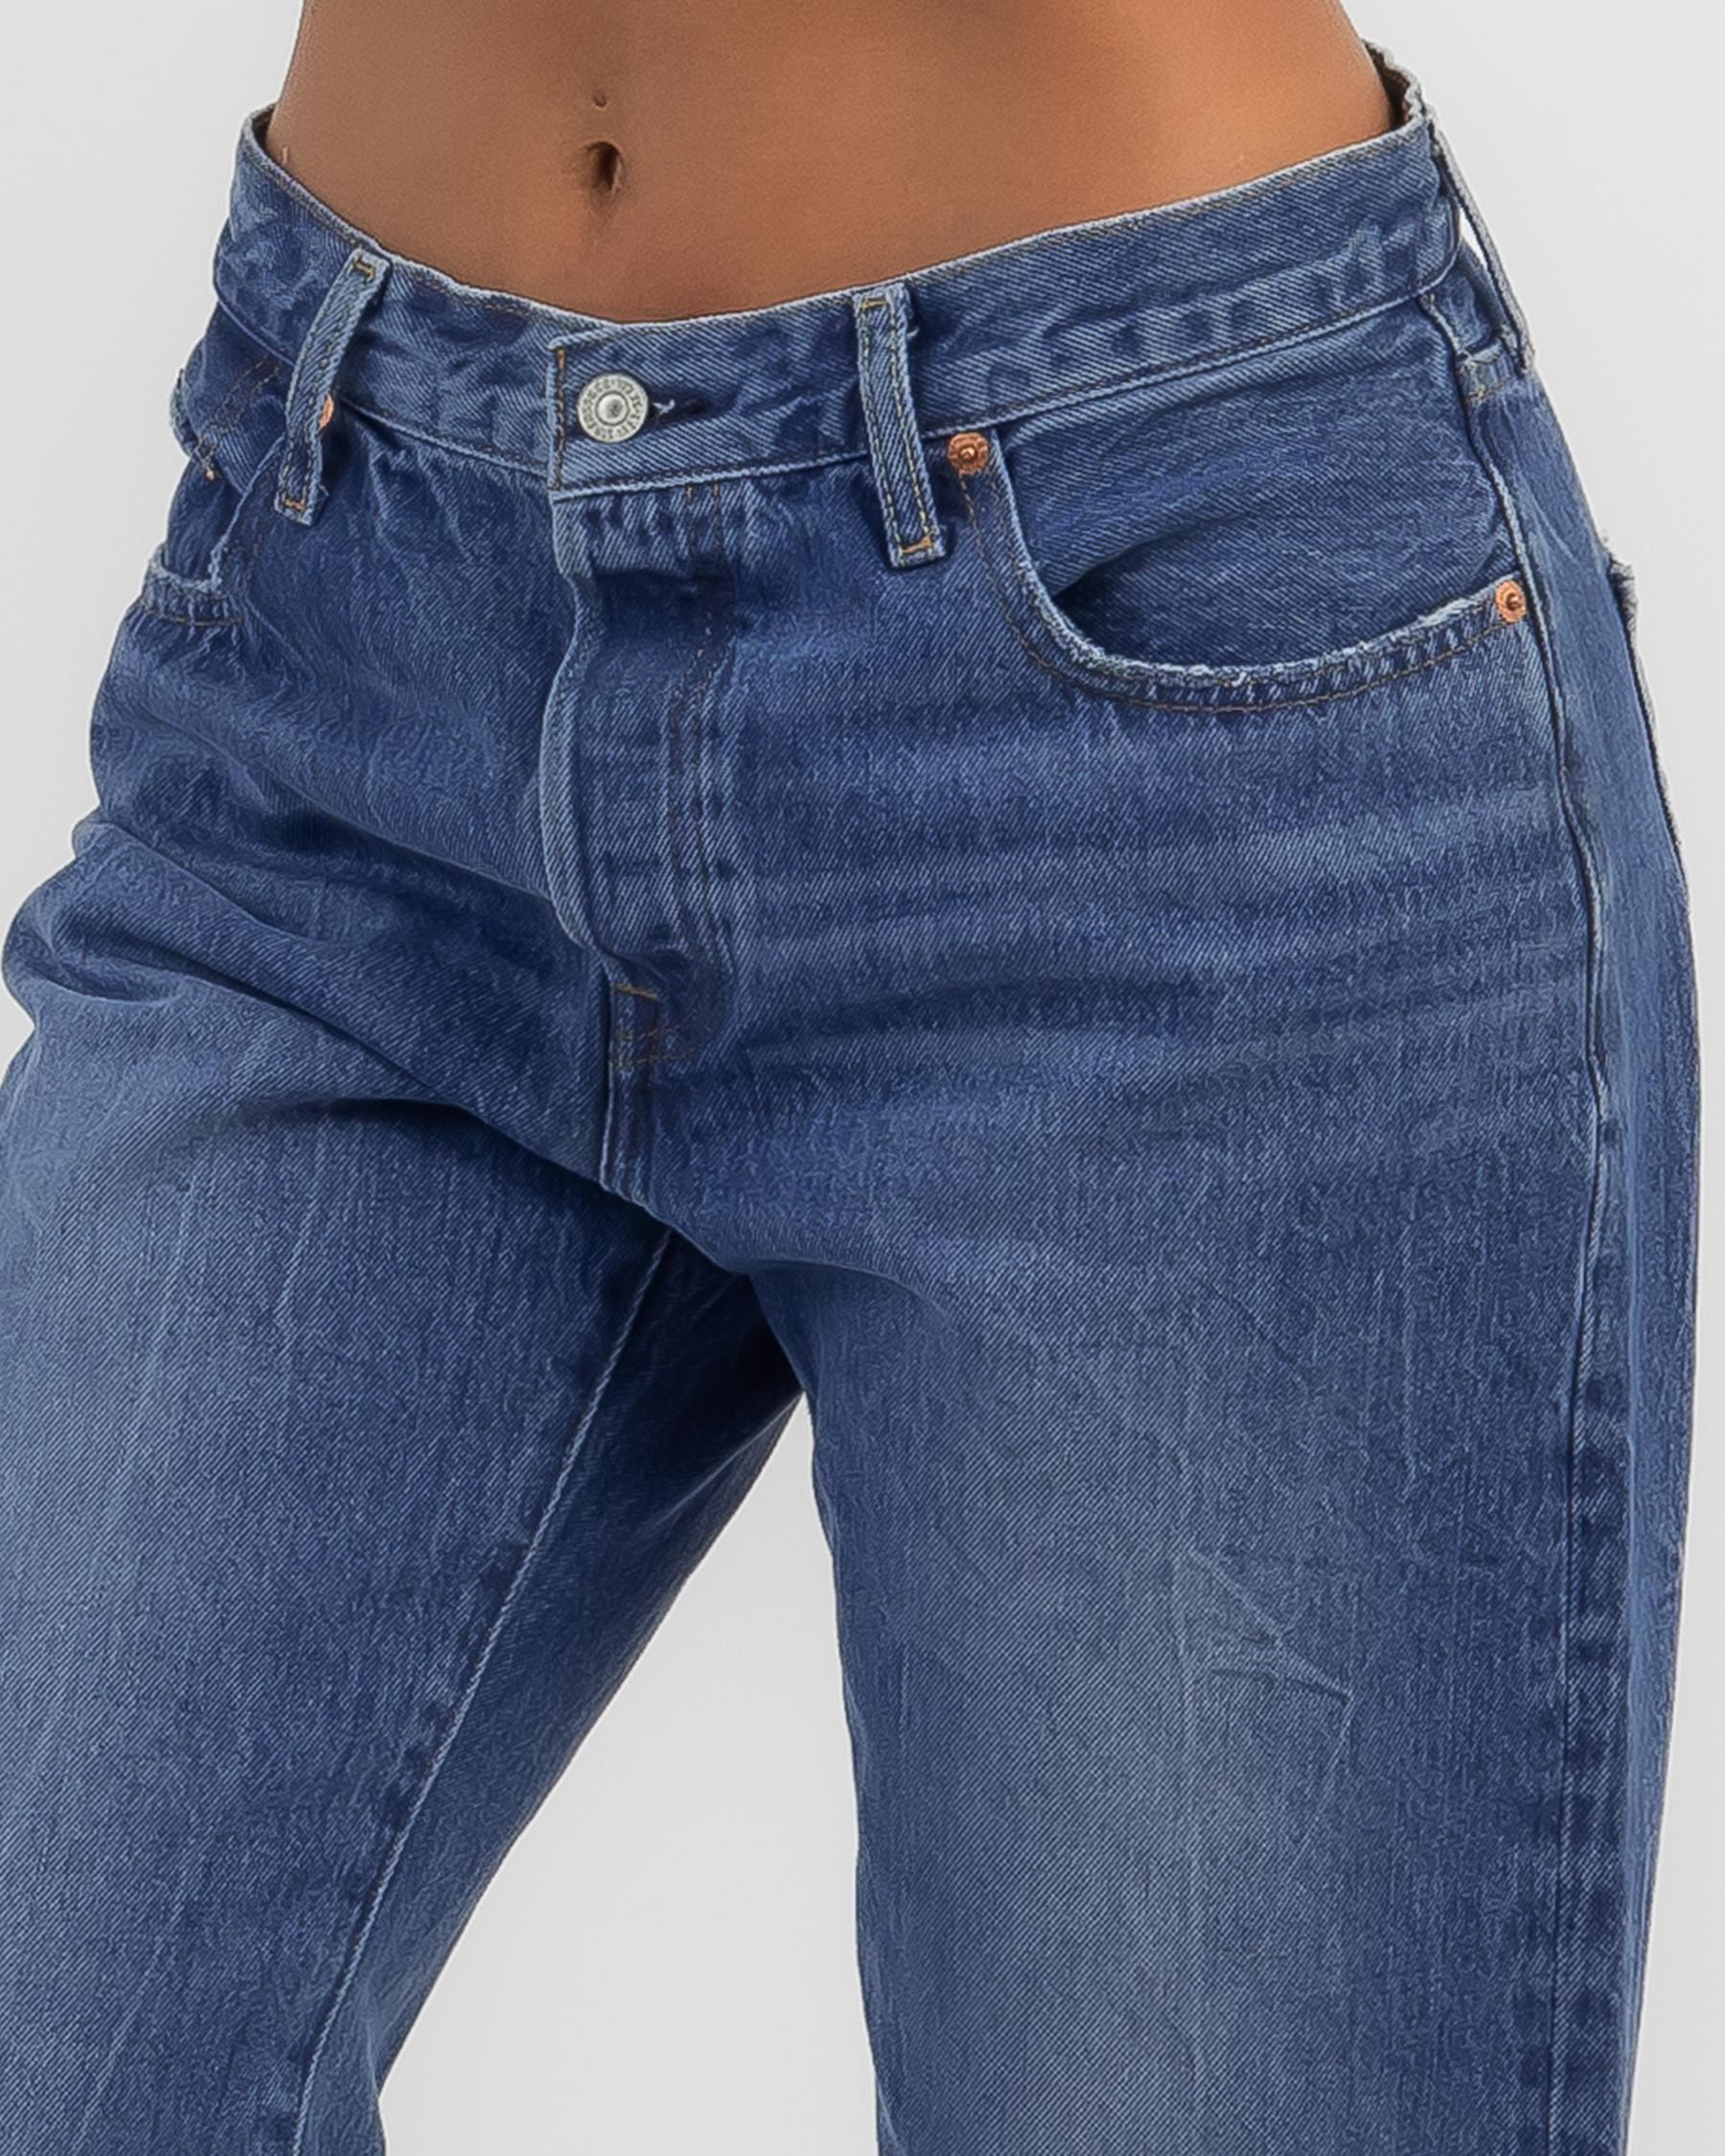 Levi's 90's 501 Jeans In Blue Beauty - Fast Shipping & Easy Returns ...